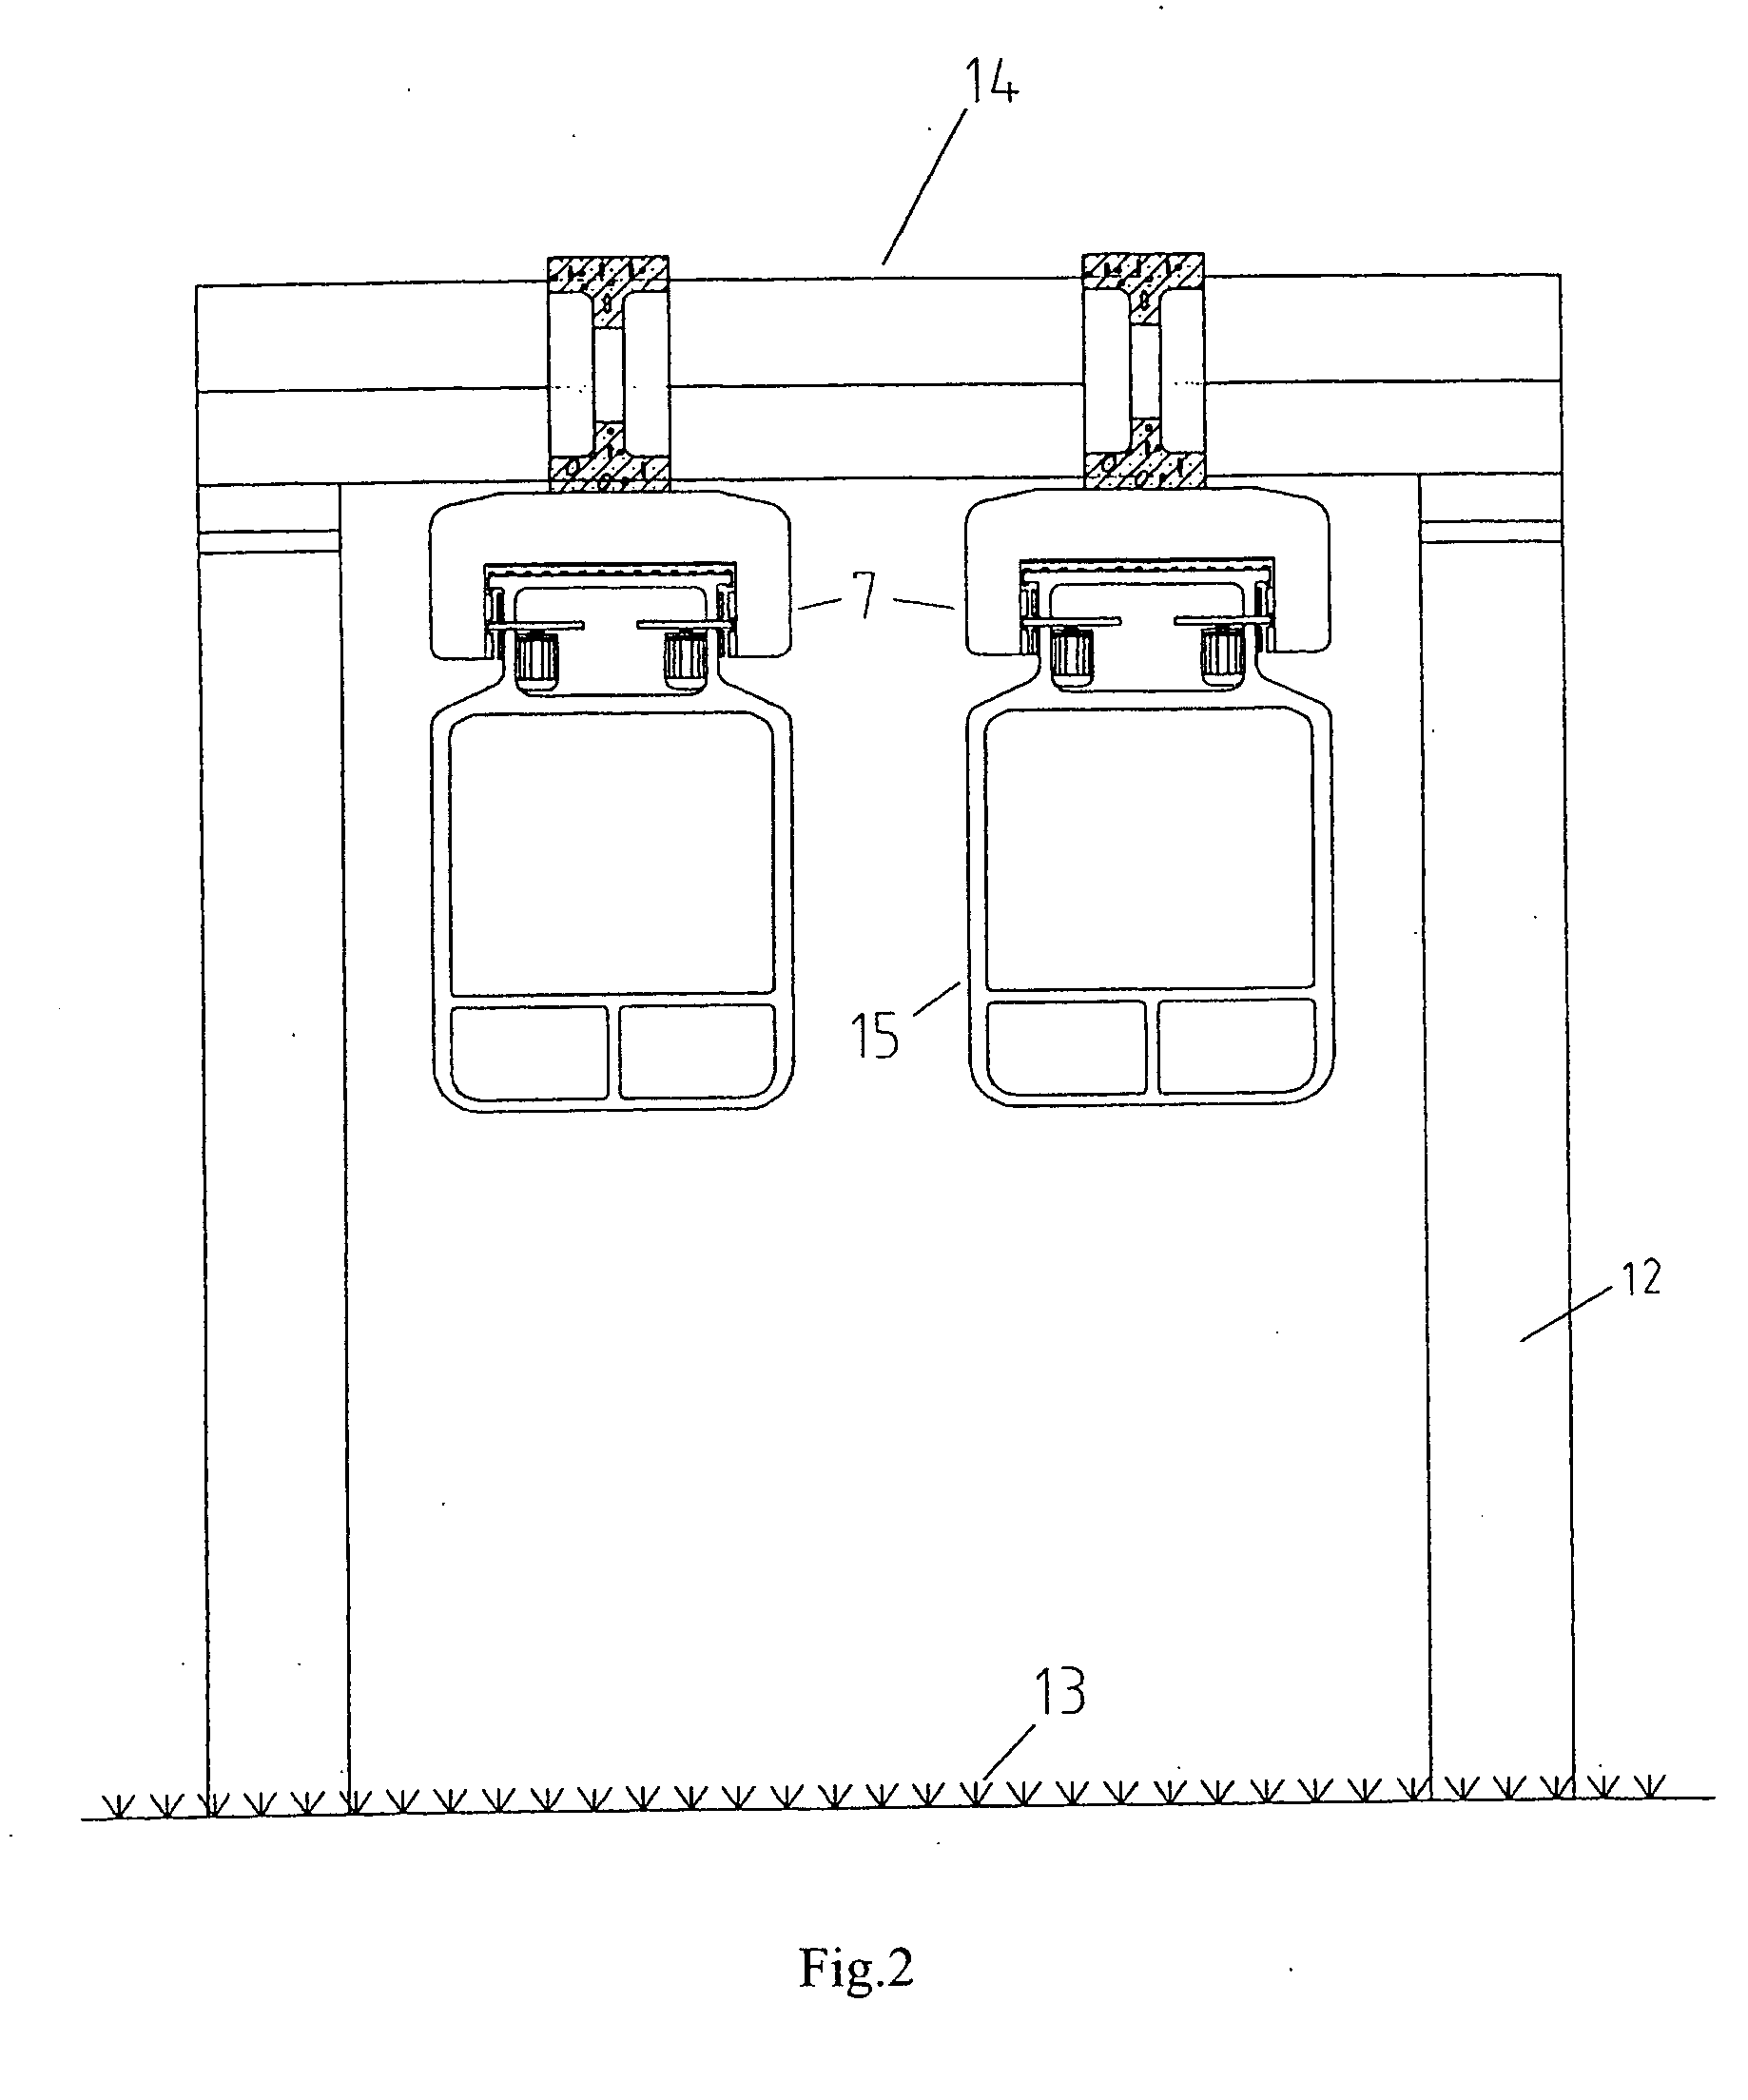 Suspending-rail and dual-attraction balancing compensation type permanent magnetic levitation train and railway system